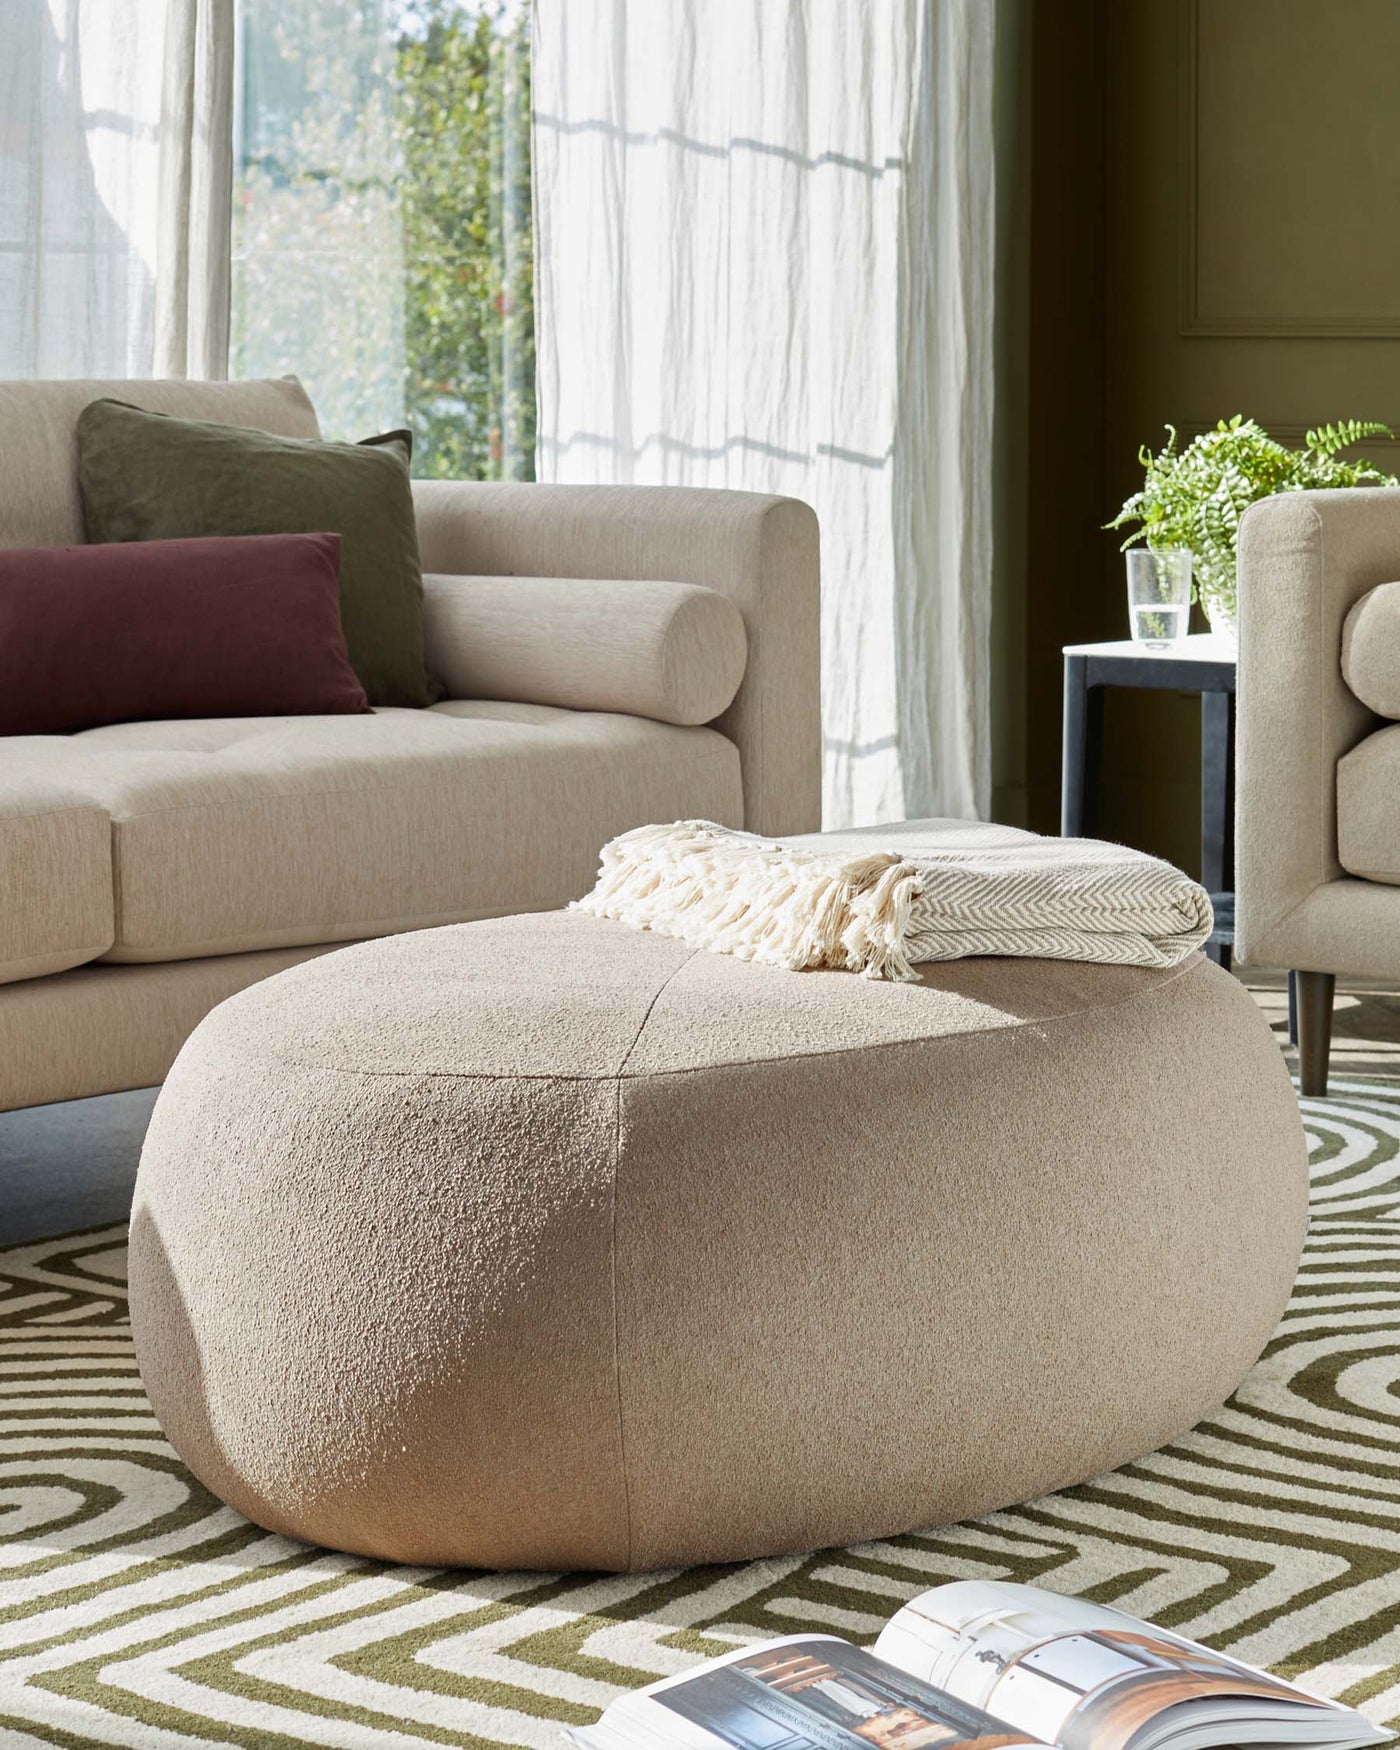 A modern beige upholstered armchair with rounded contours and a matching oversized round ottoman in a plush fabric. The ottoman is adorned with a cream-colored textured throw blanket. A small dark grey side table with a potted fern and glass cup is visible in the background. The setting is completed with a geometric-patterned area rug in complementary neutral tones.